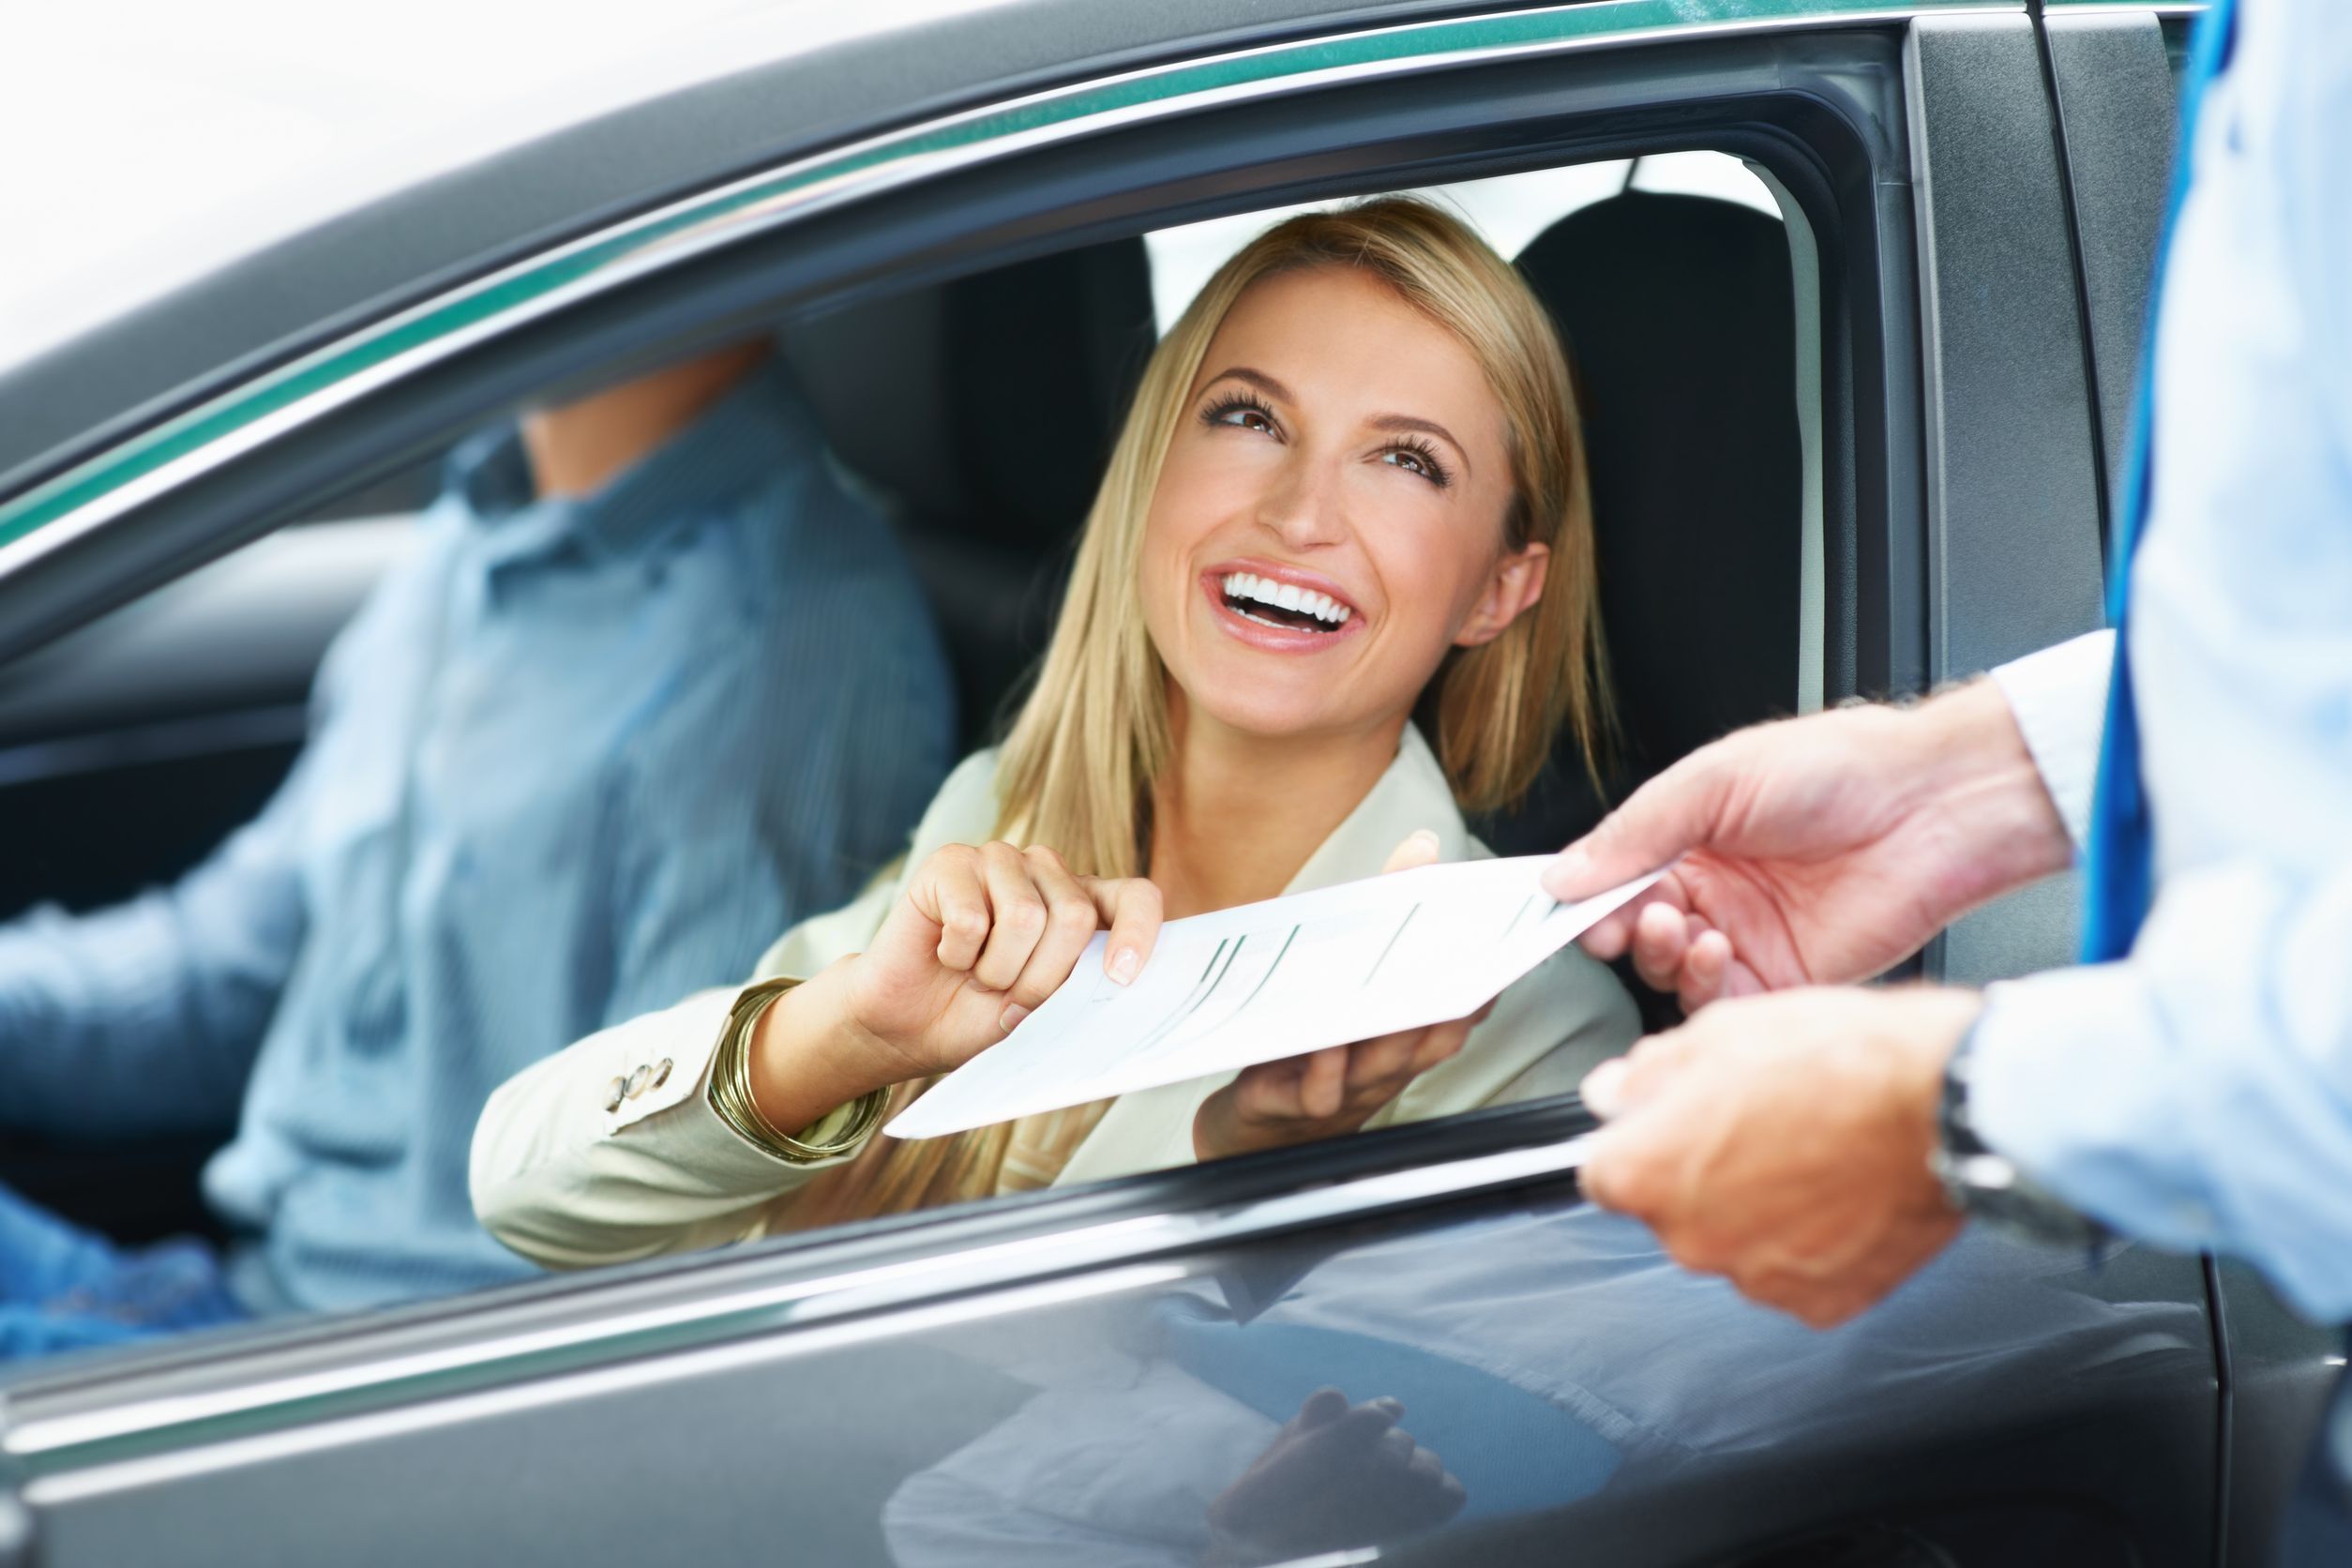 Used Cars for Sale: Always Look at Maintenance and Reliability